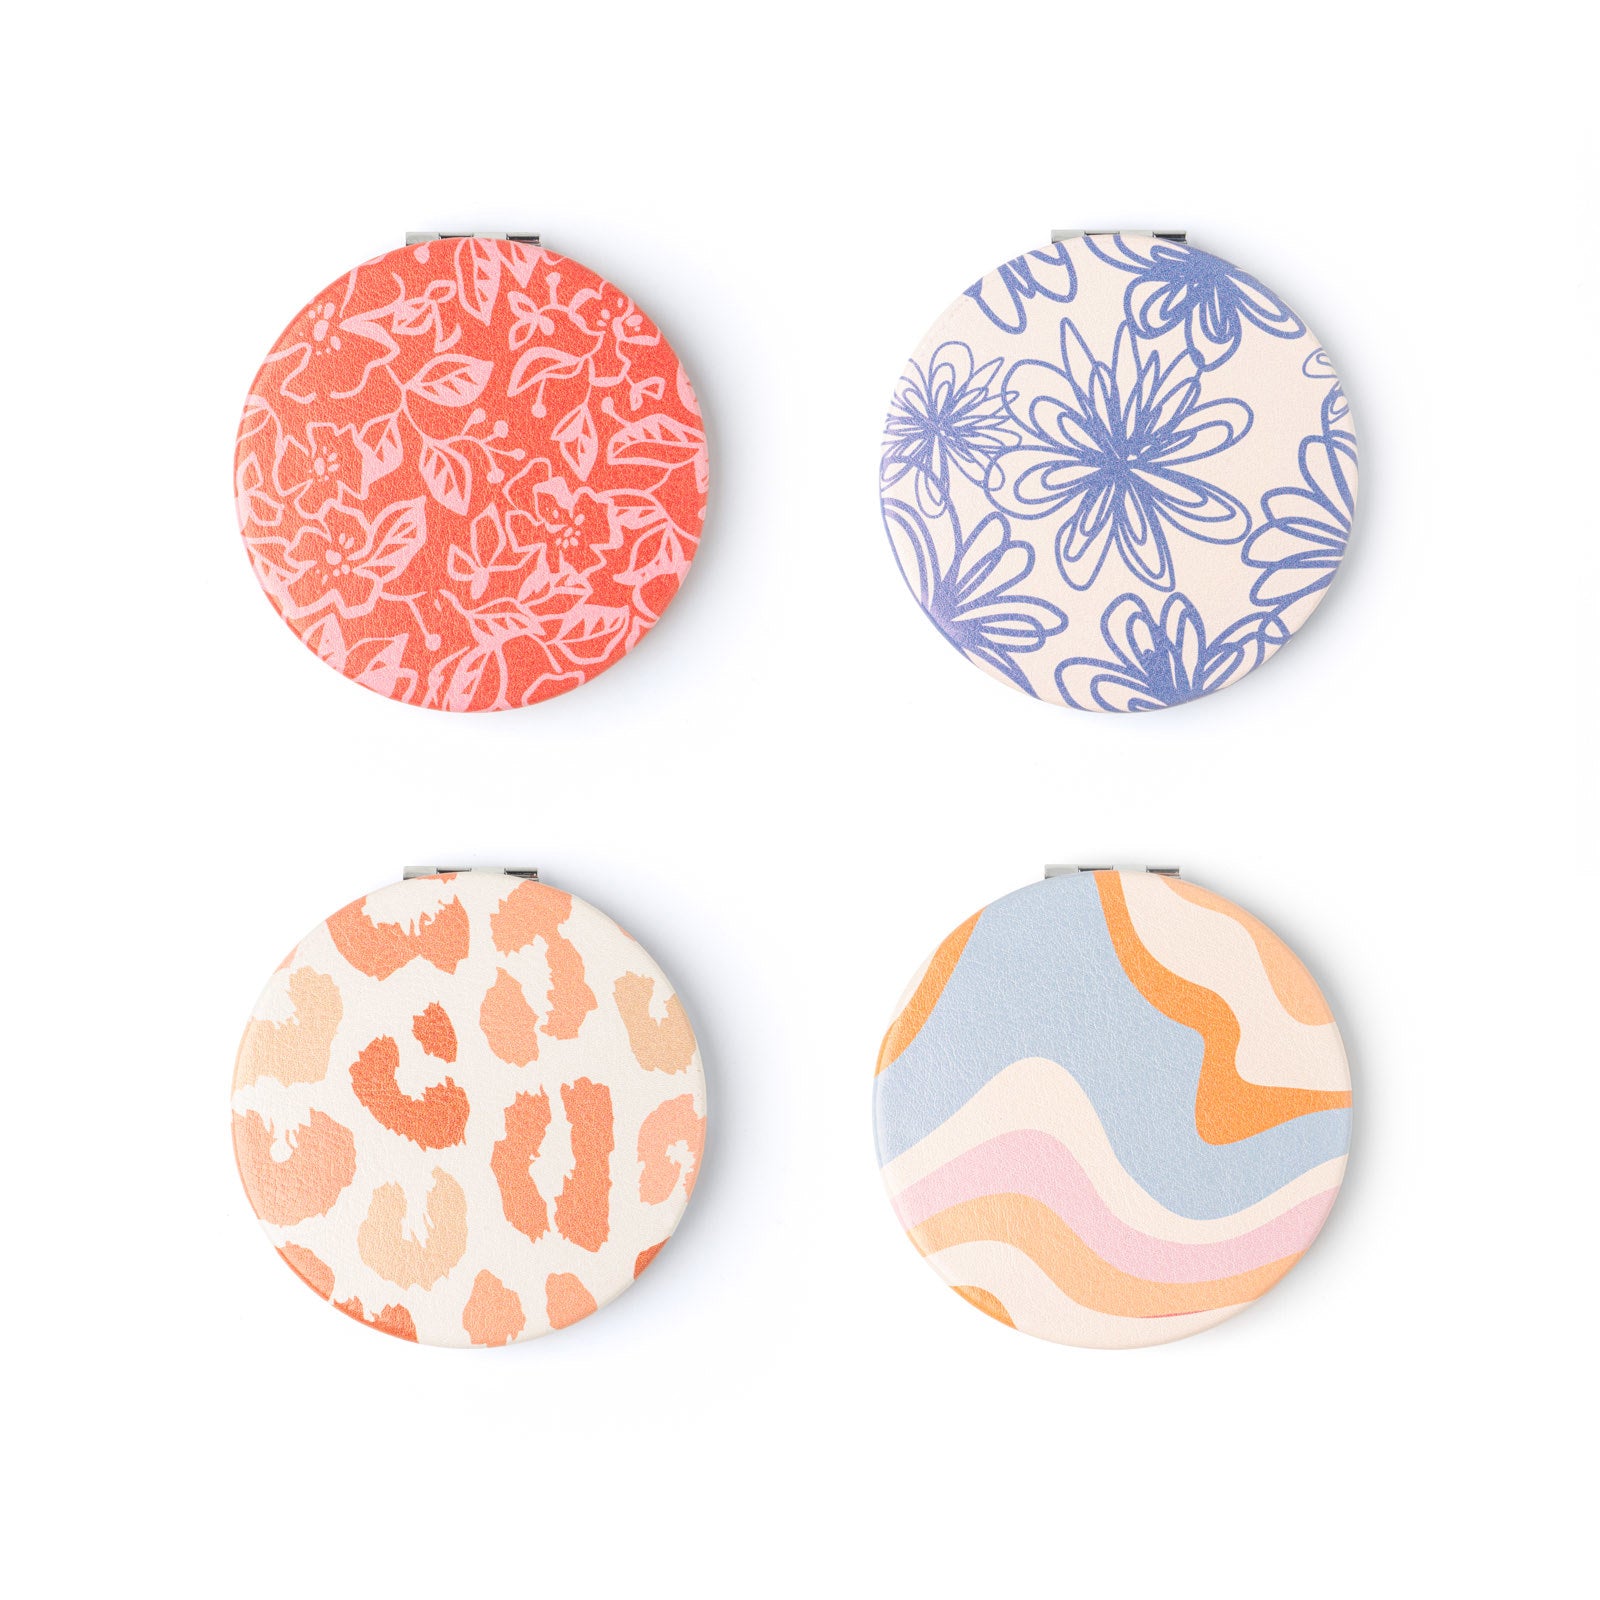 4 styles of compact mirrors arranged on a white background.